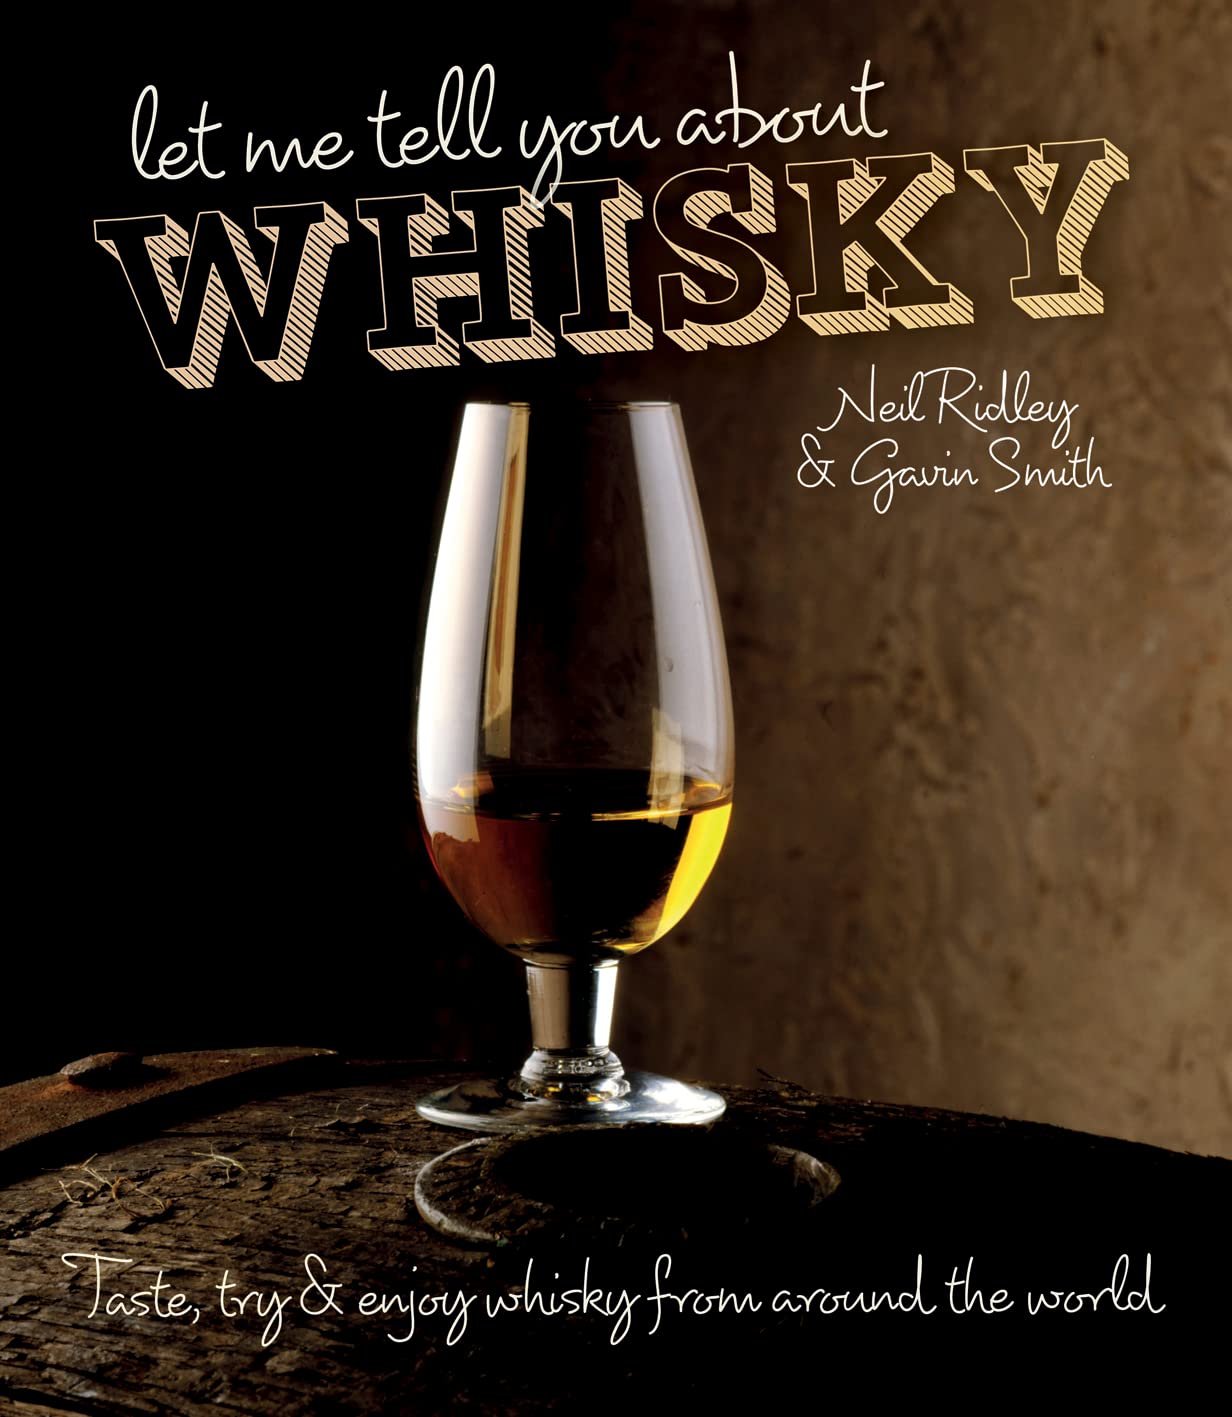 Let Me Tell You About Whisky | Gavin Smith, Neil Ridley